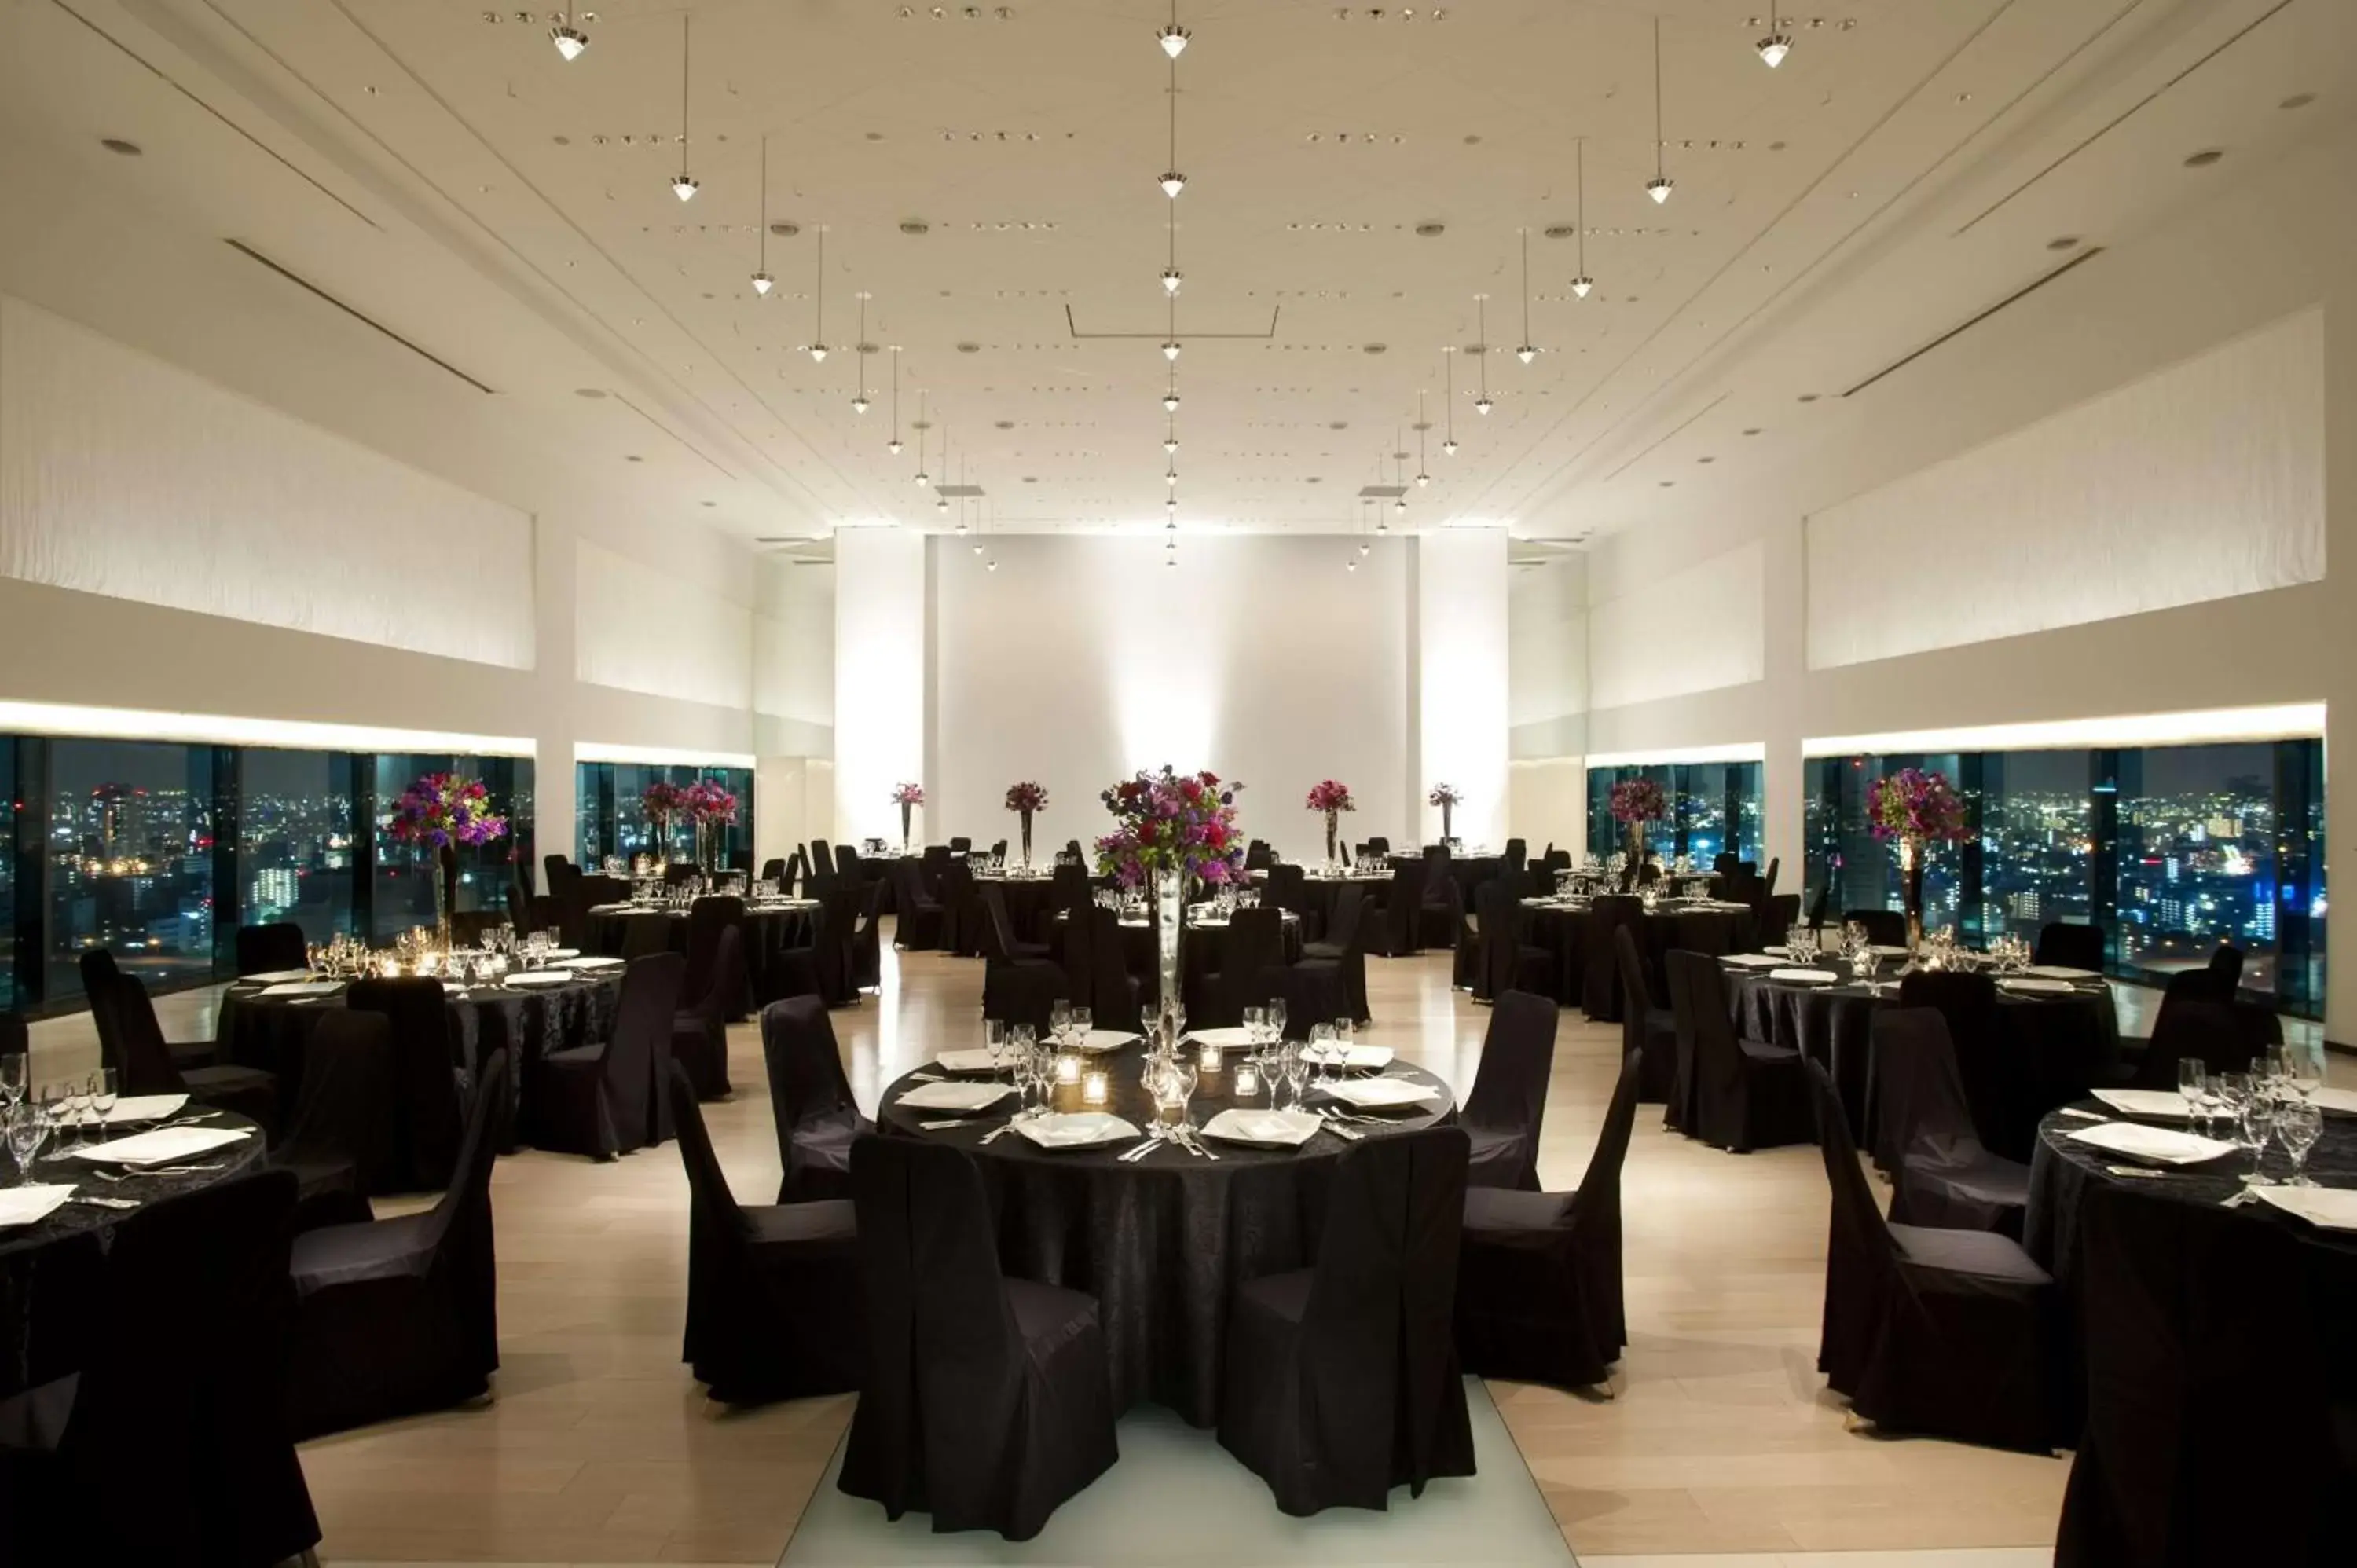 Meeting/conference room, Banquet Facilities in Hilton Nagoya Hotel